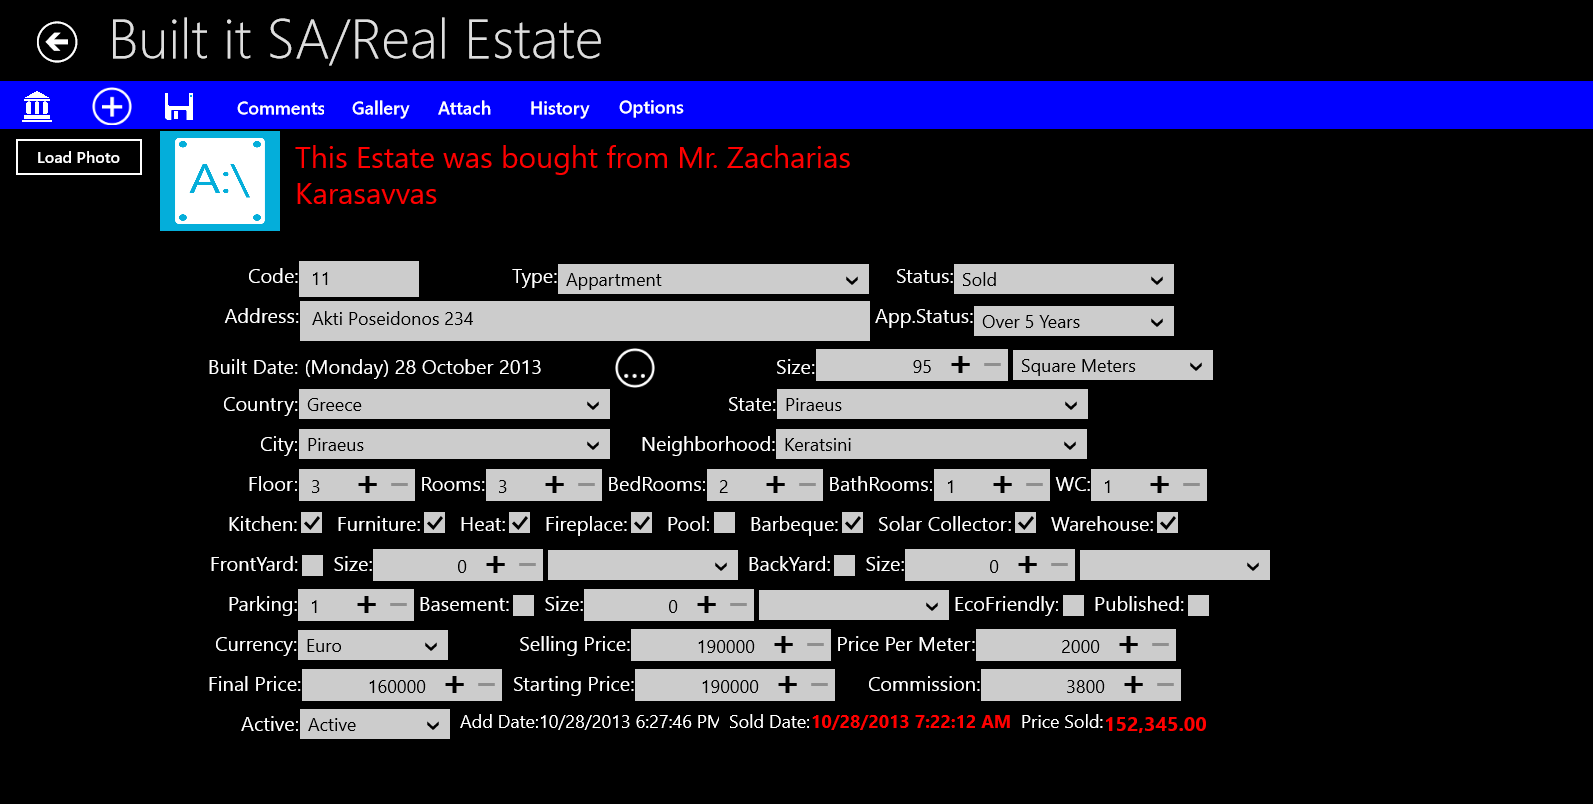 Real Estate Page